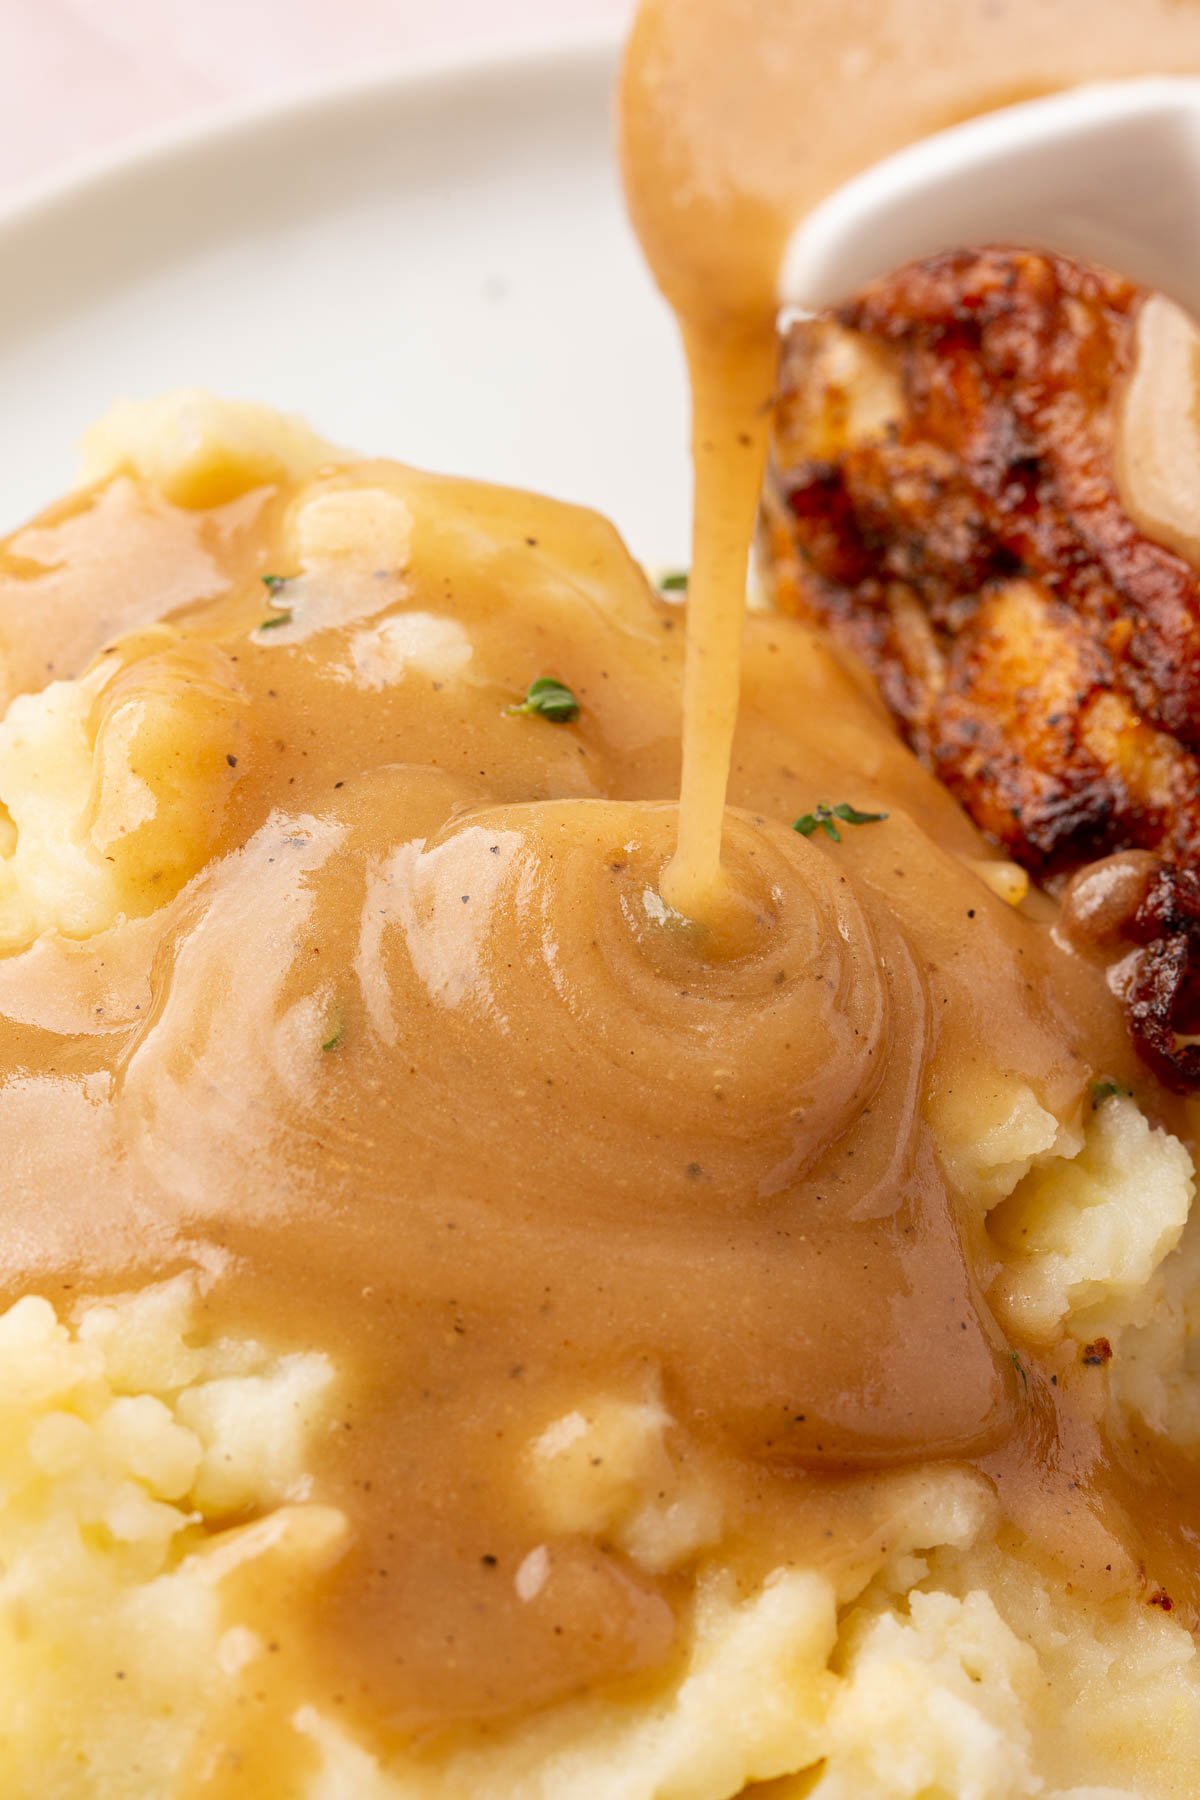 Gluten-free gravy being poured over a serving of mashed potatoes.